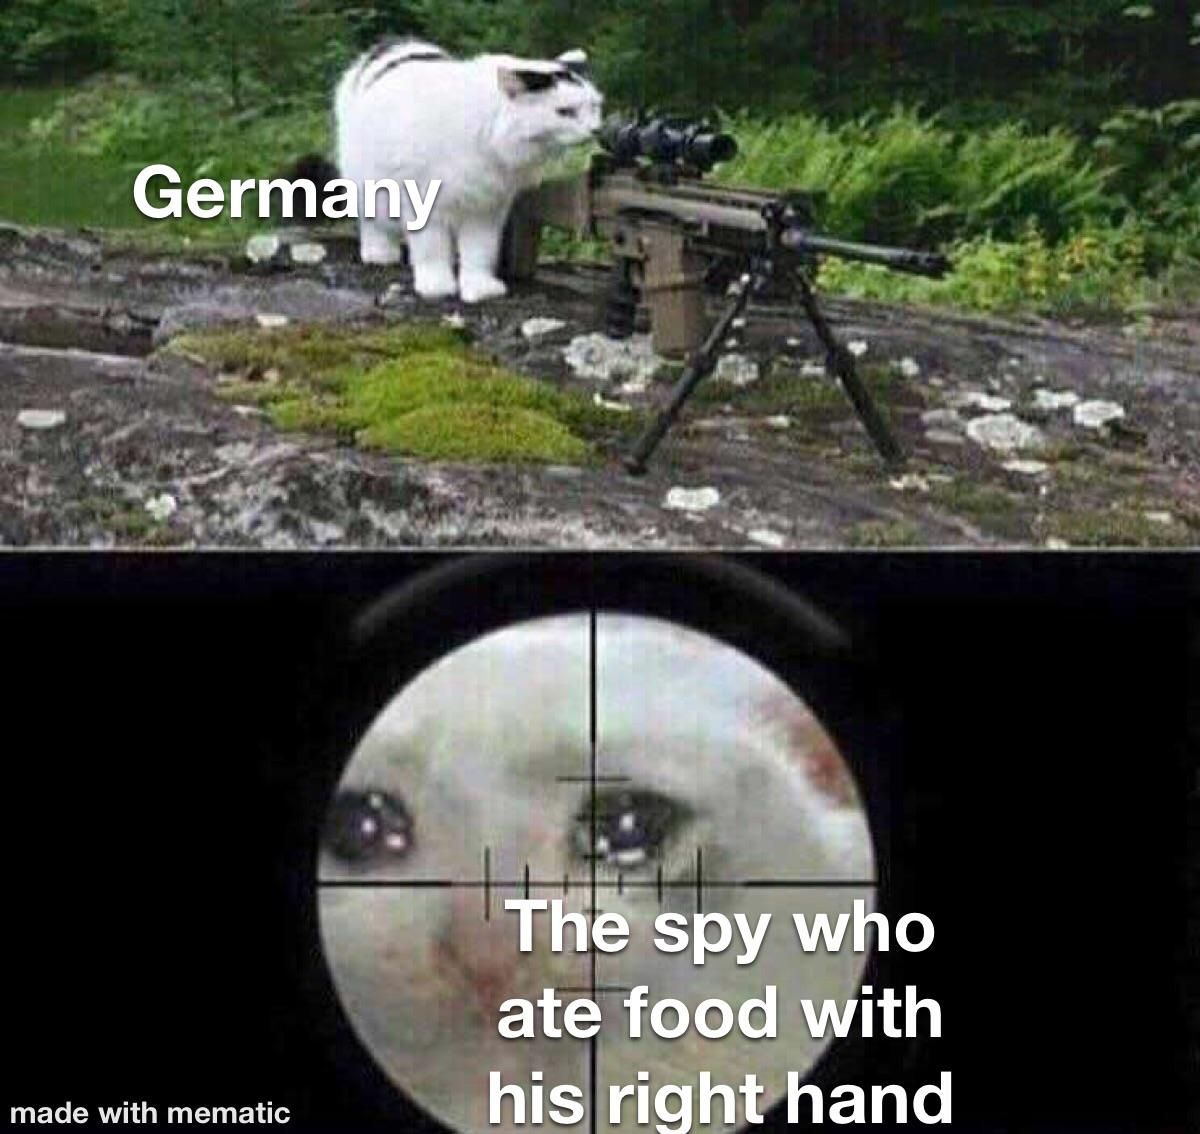 90% of the world is right handed, so Nazi Germany taught all their soldiers to eat left handed so if there was a spy they would know by watching them eat